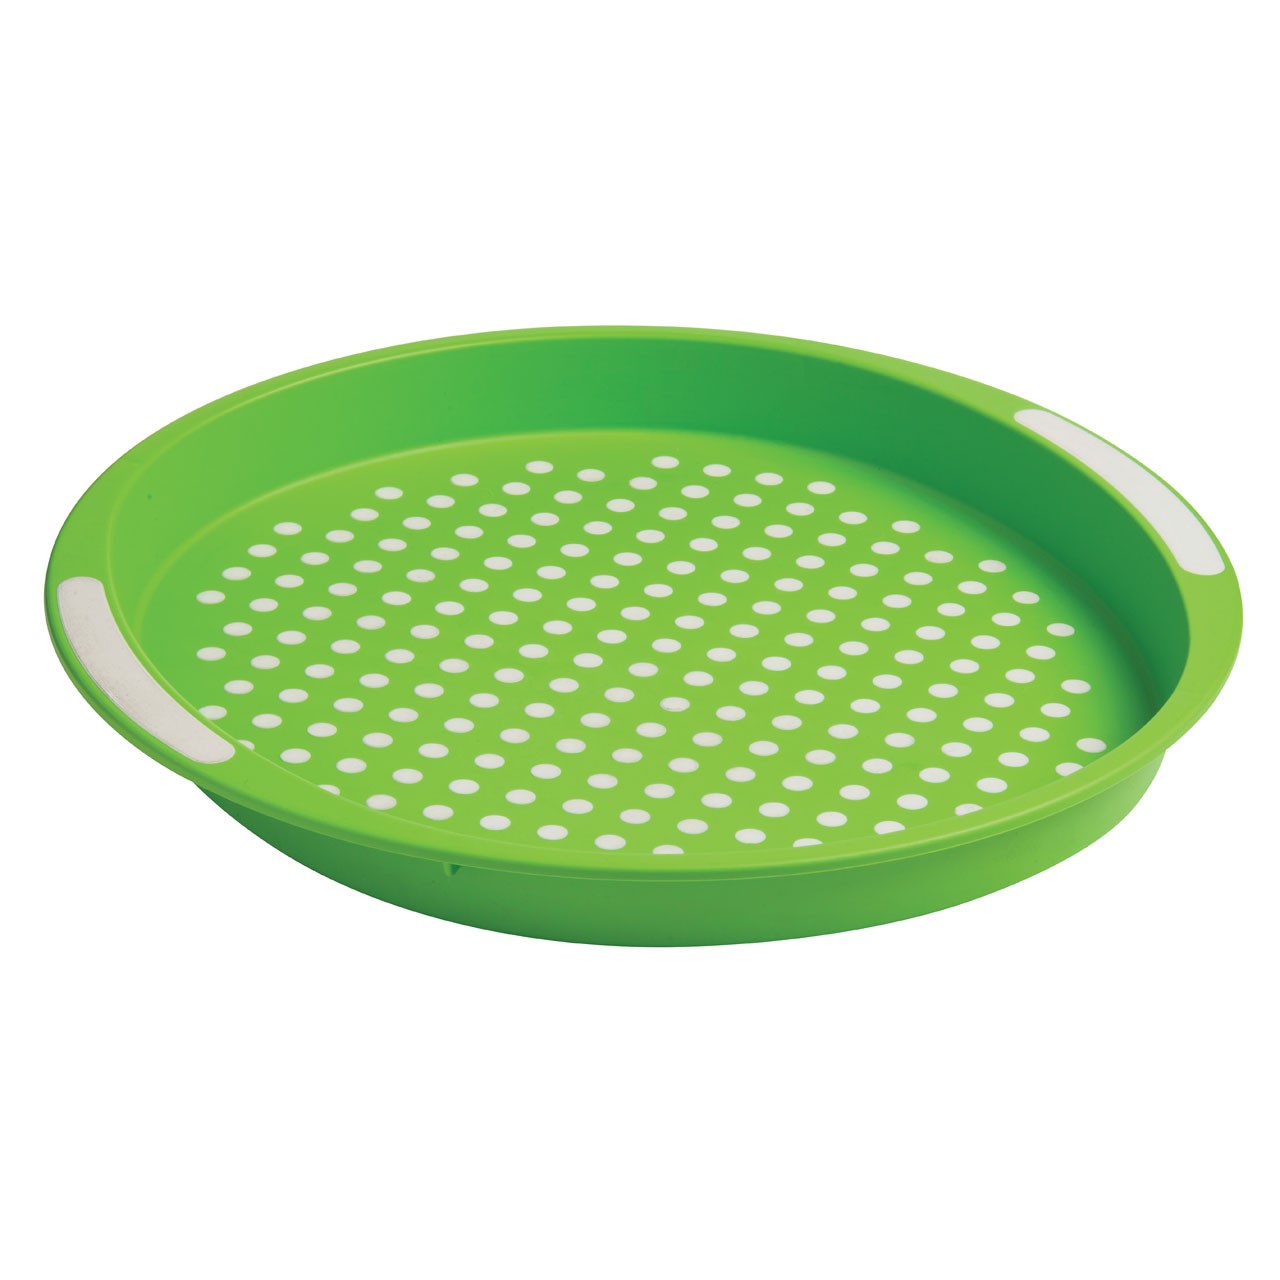 Anti-Slip Serving Tray PP & Tpe Green With White Dots